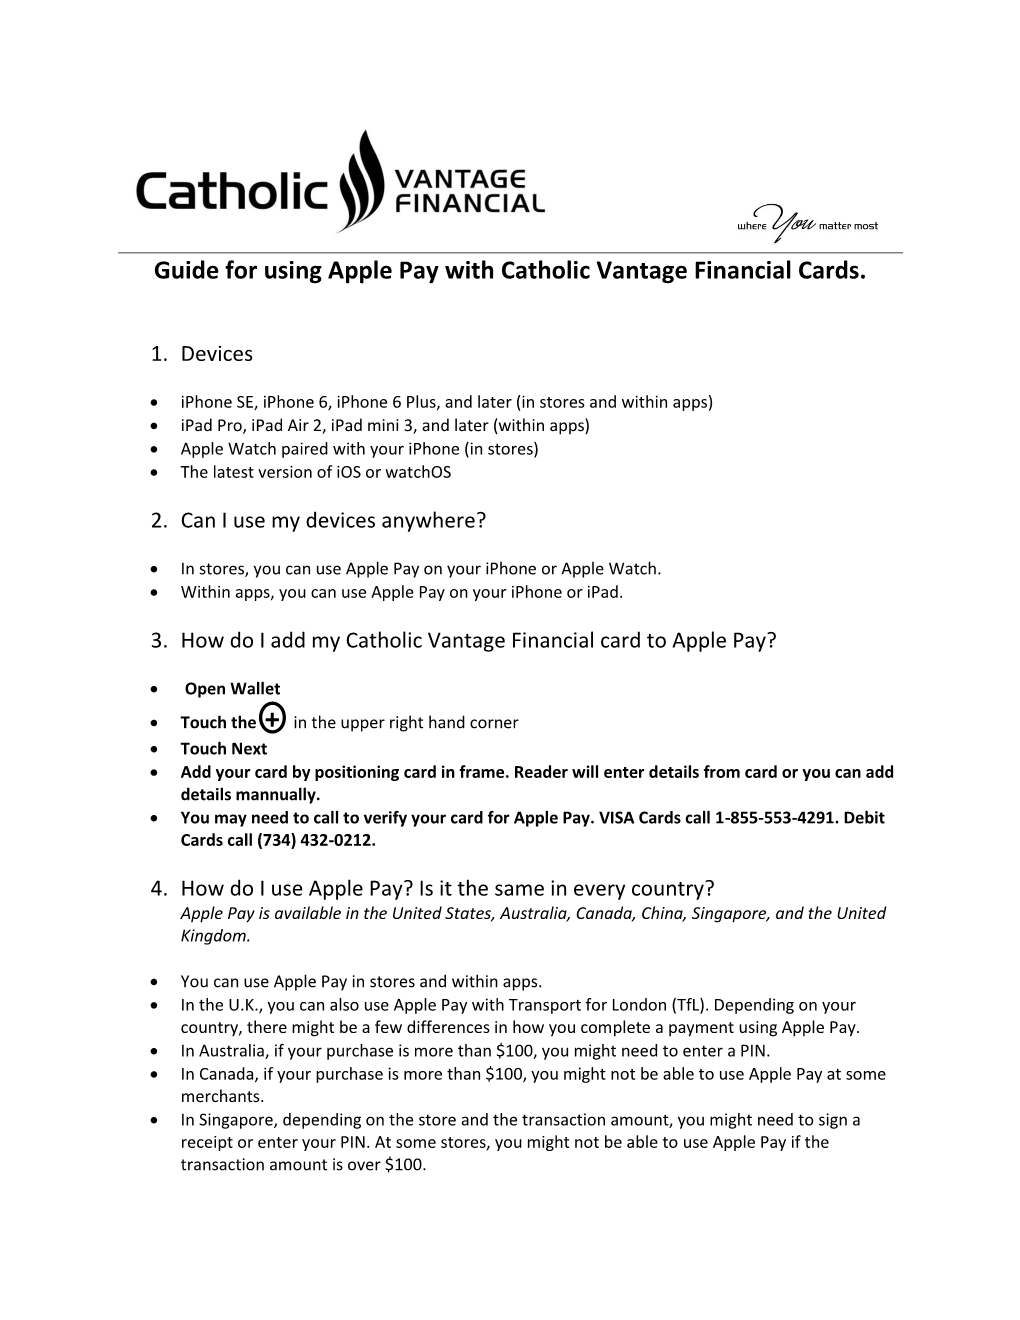 Guide for Using Apple Pay with Catholic Vantage Financial Cards